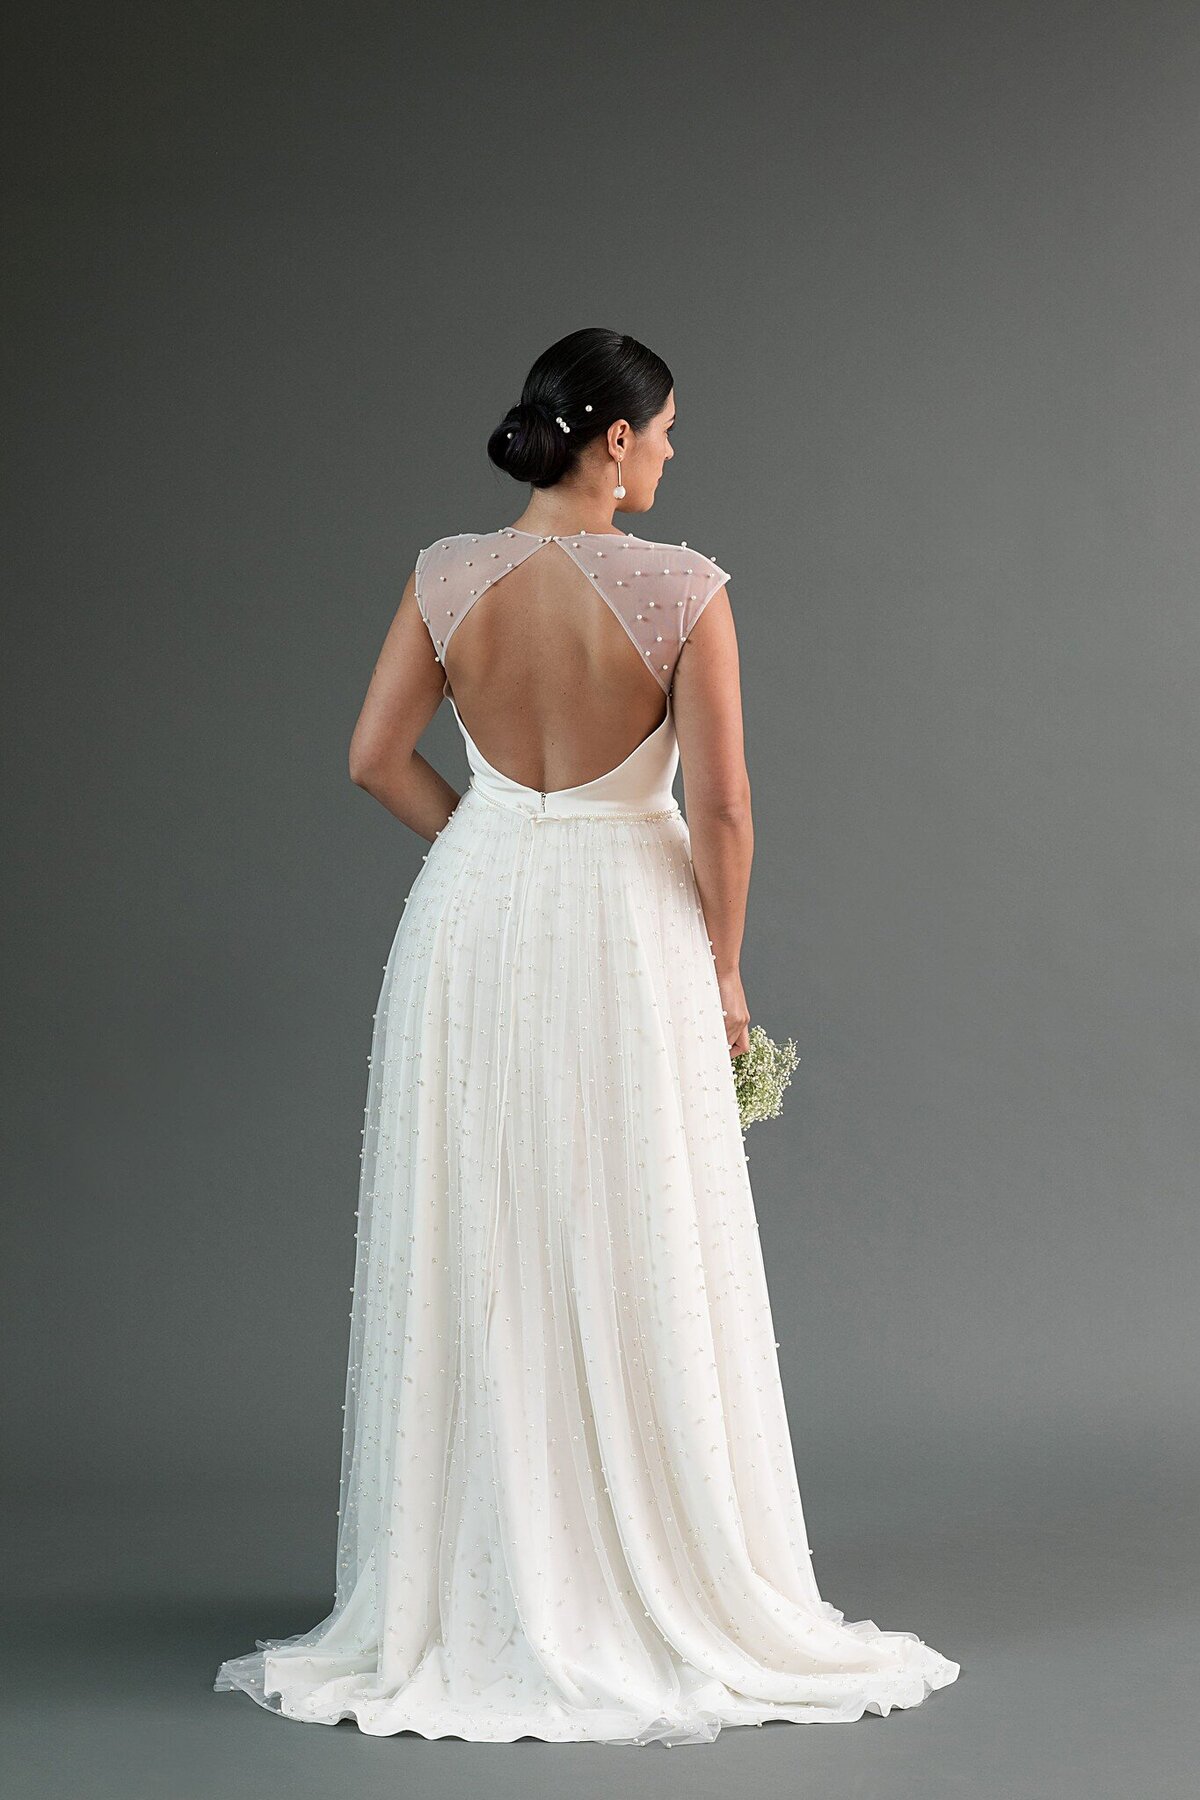 The gathered pearl net skirt of this wedding dress style has a short train.